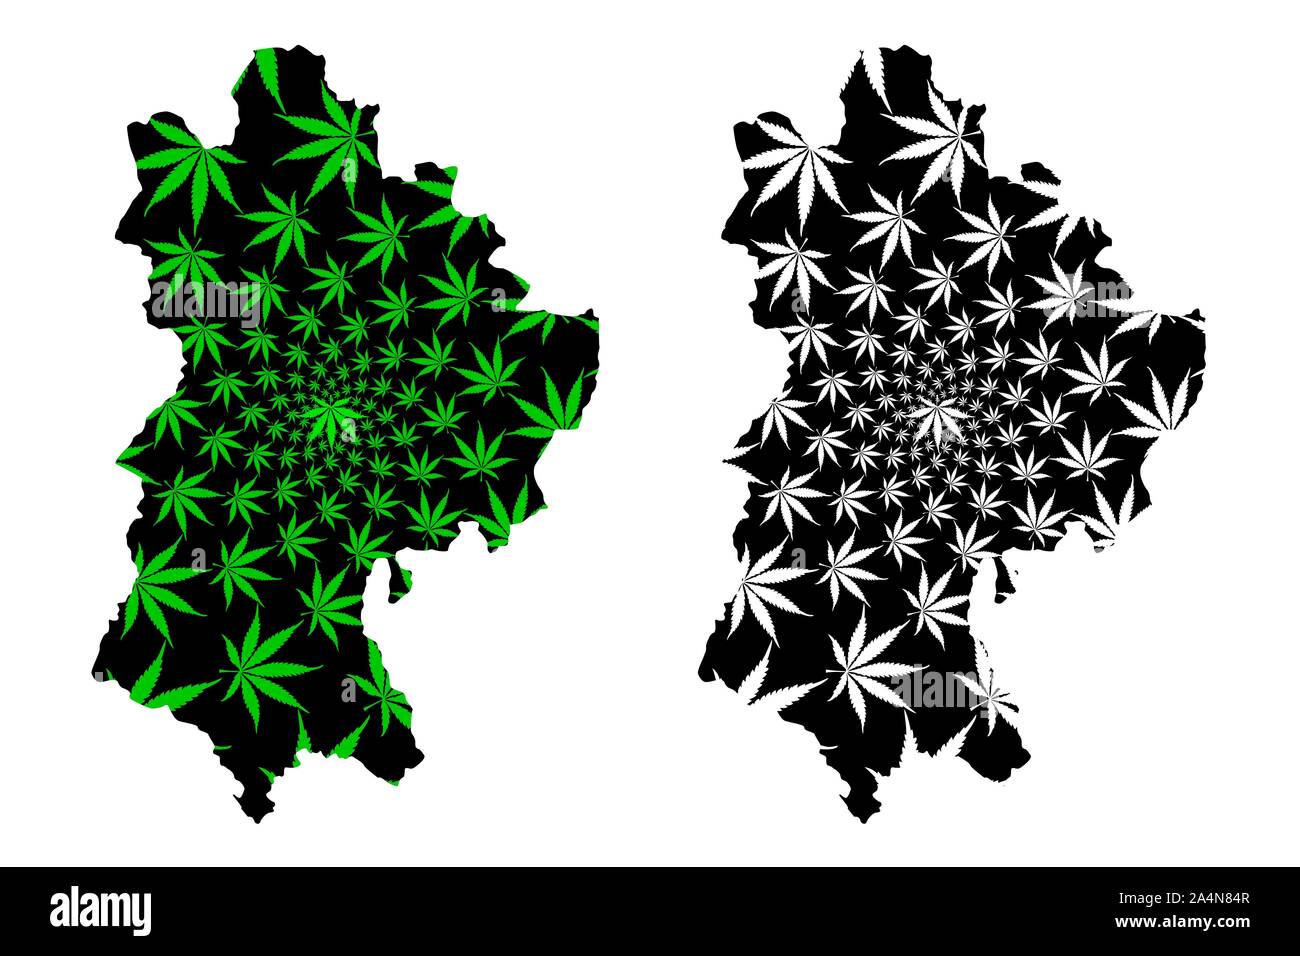 Bedfordshire (United Kingdom, England, Non-metropolitan county, shire county) map is designed cannabis leaf green and black, Beds. map made of marijua Stock Vector